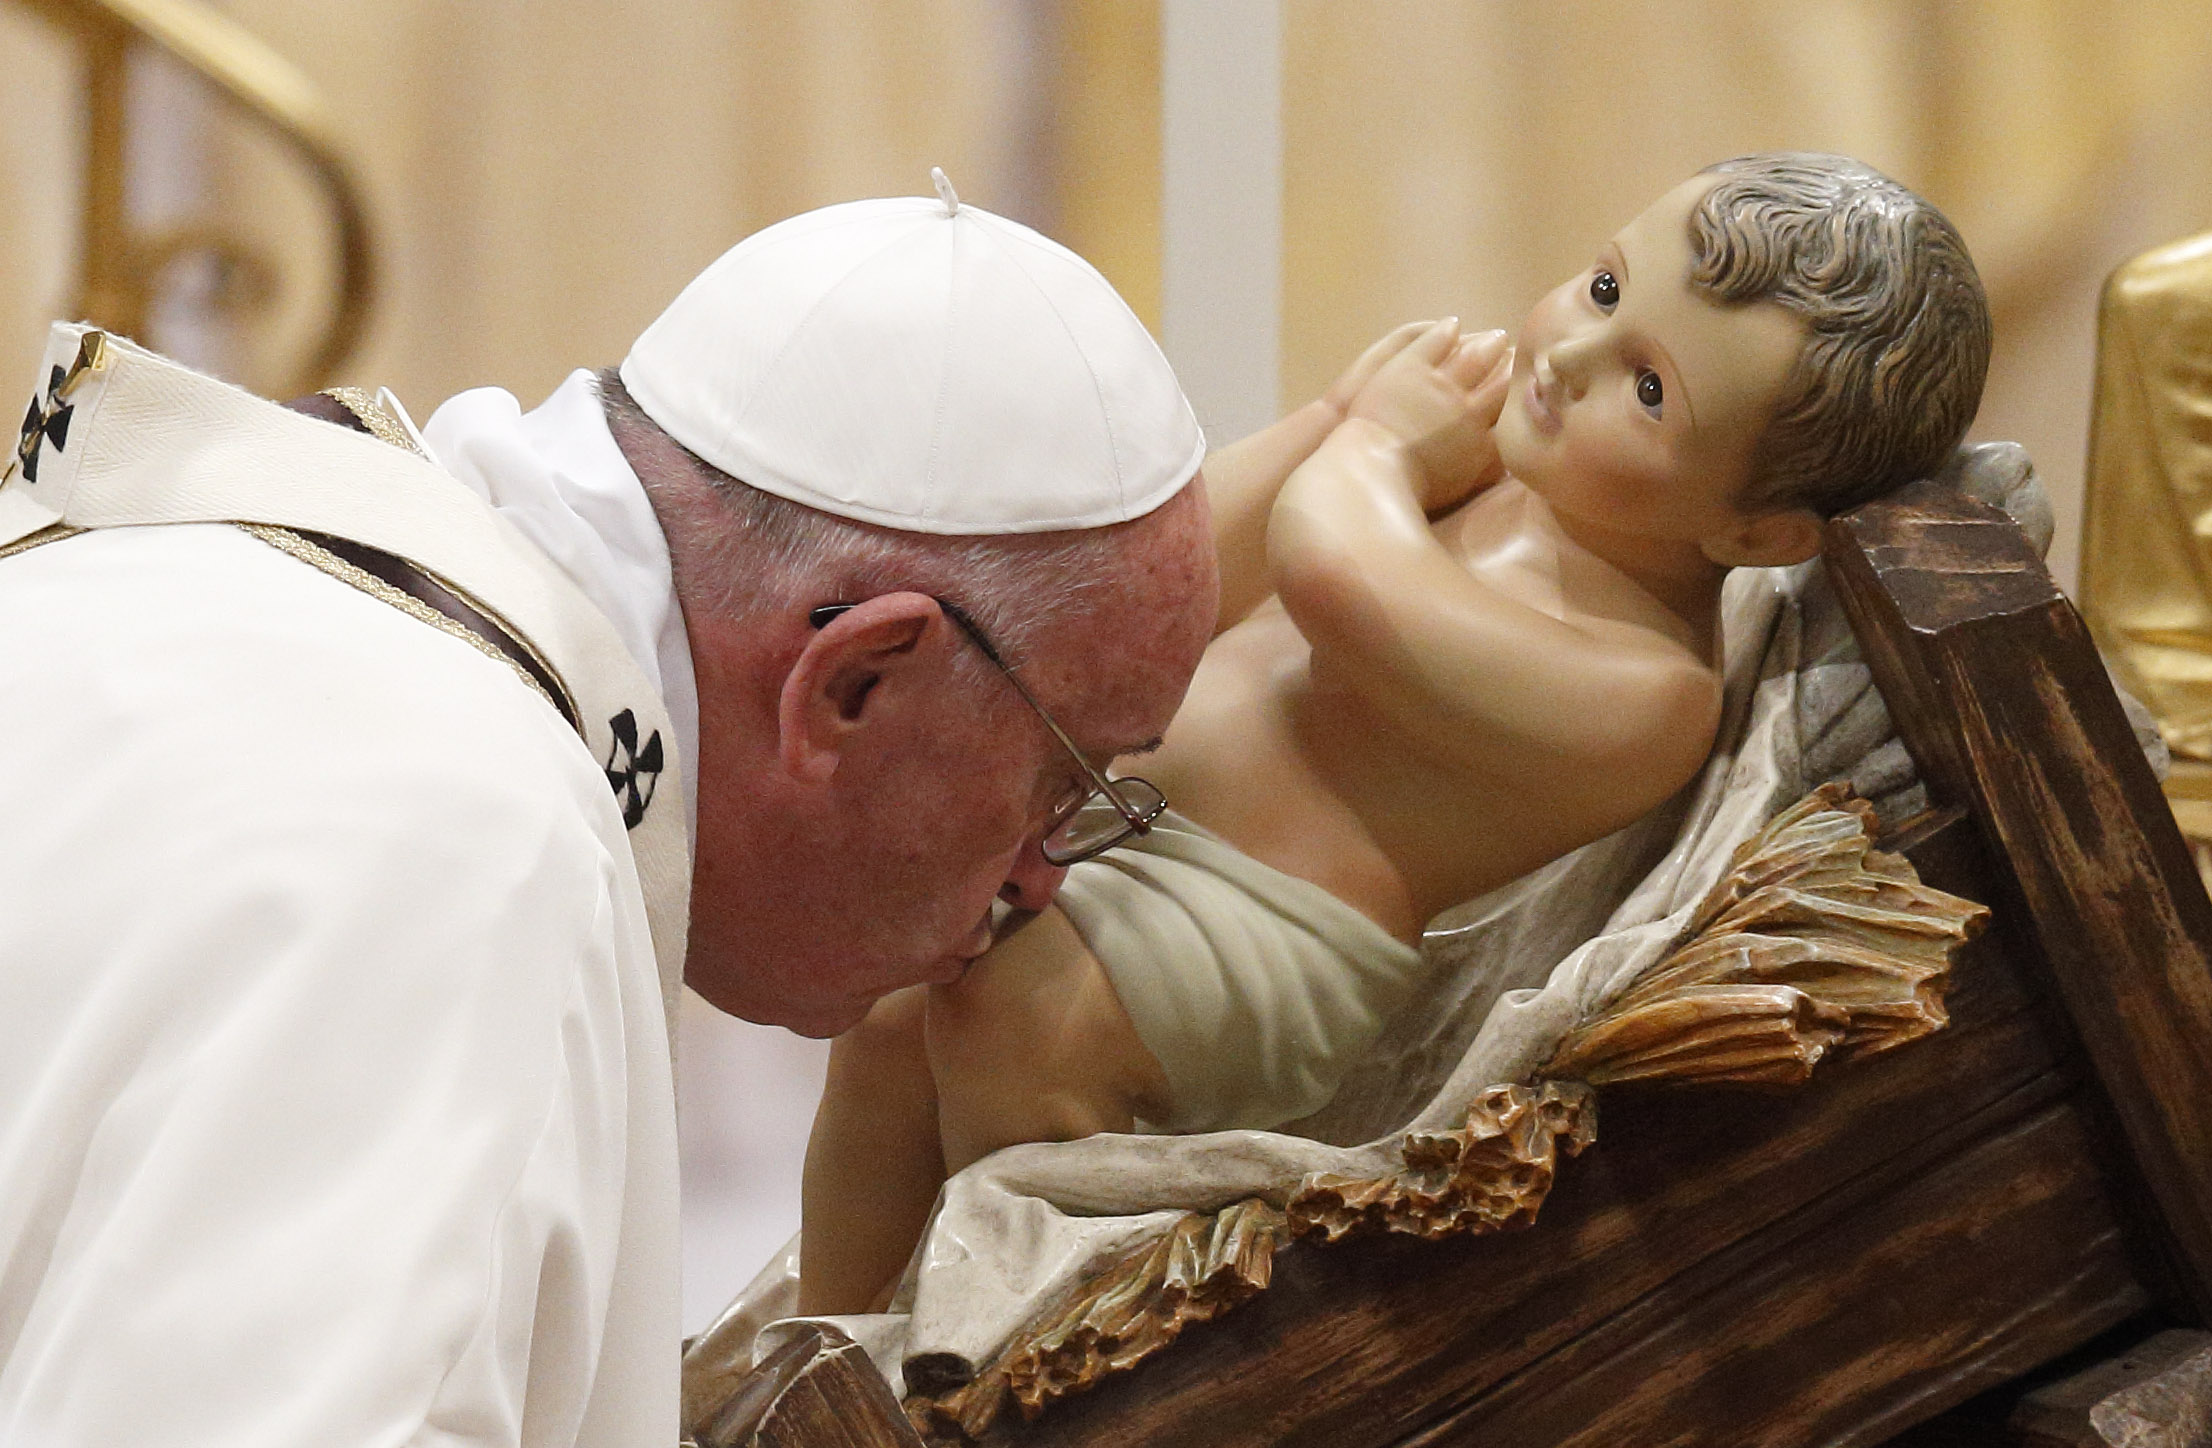 Christ’s birth can bring peace, hope to suffering world, pope says